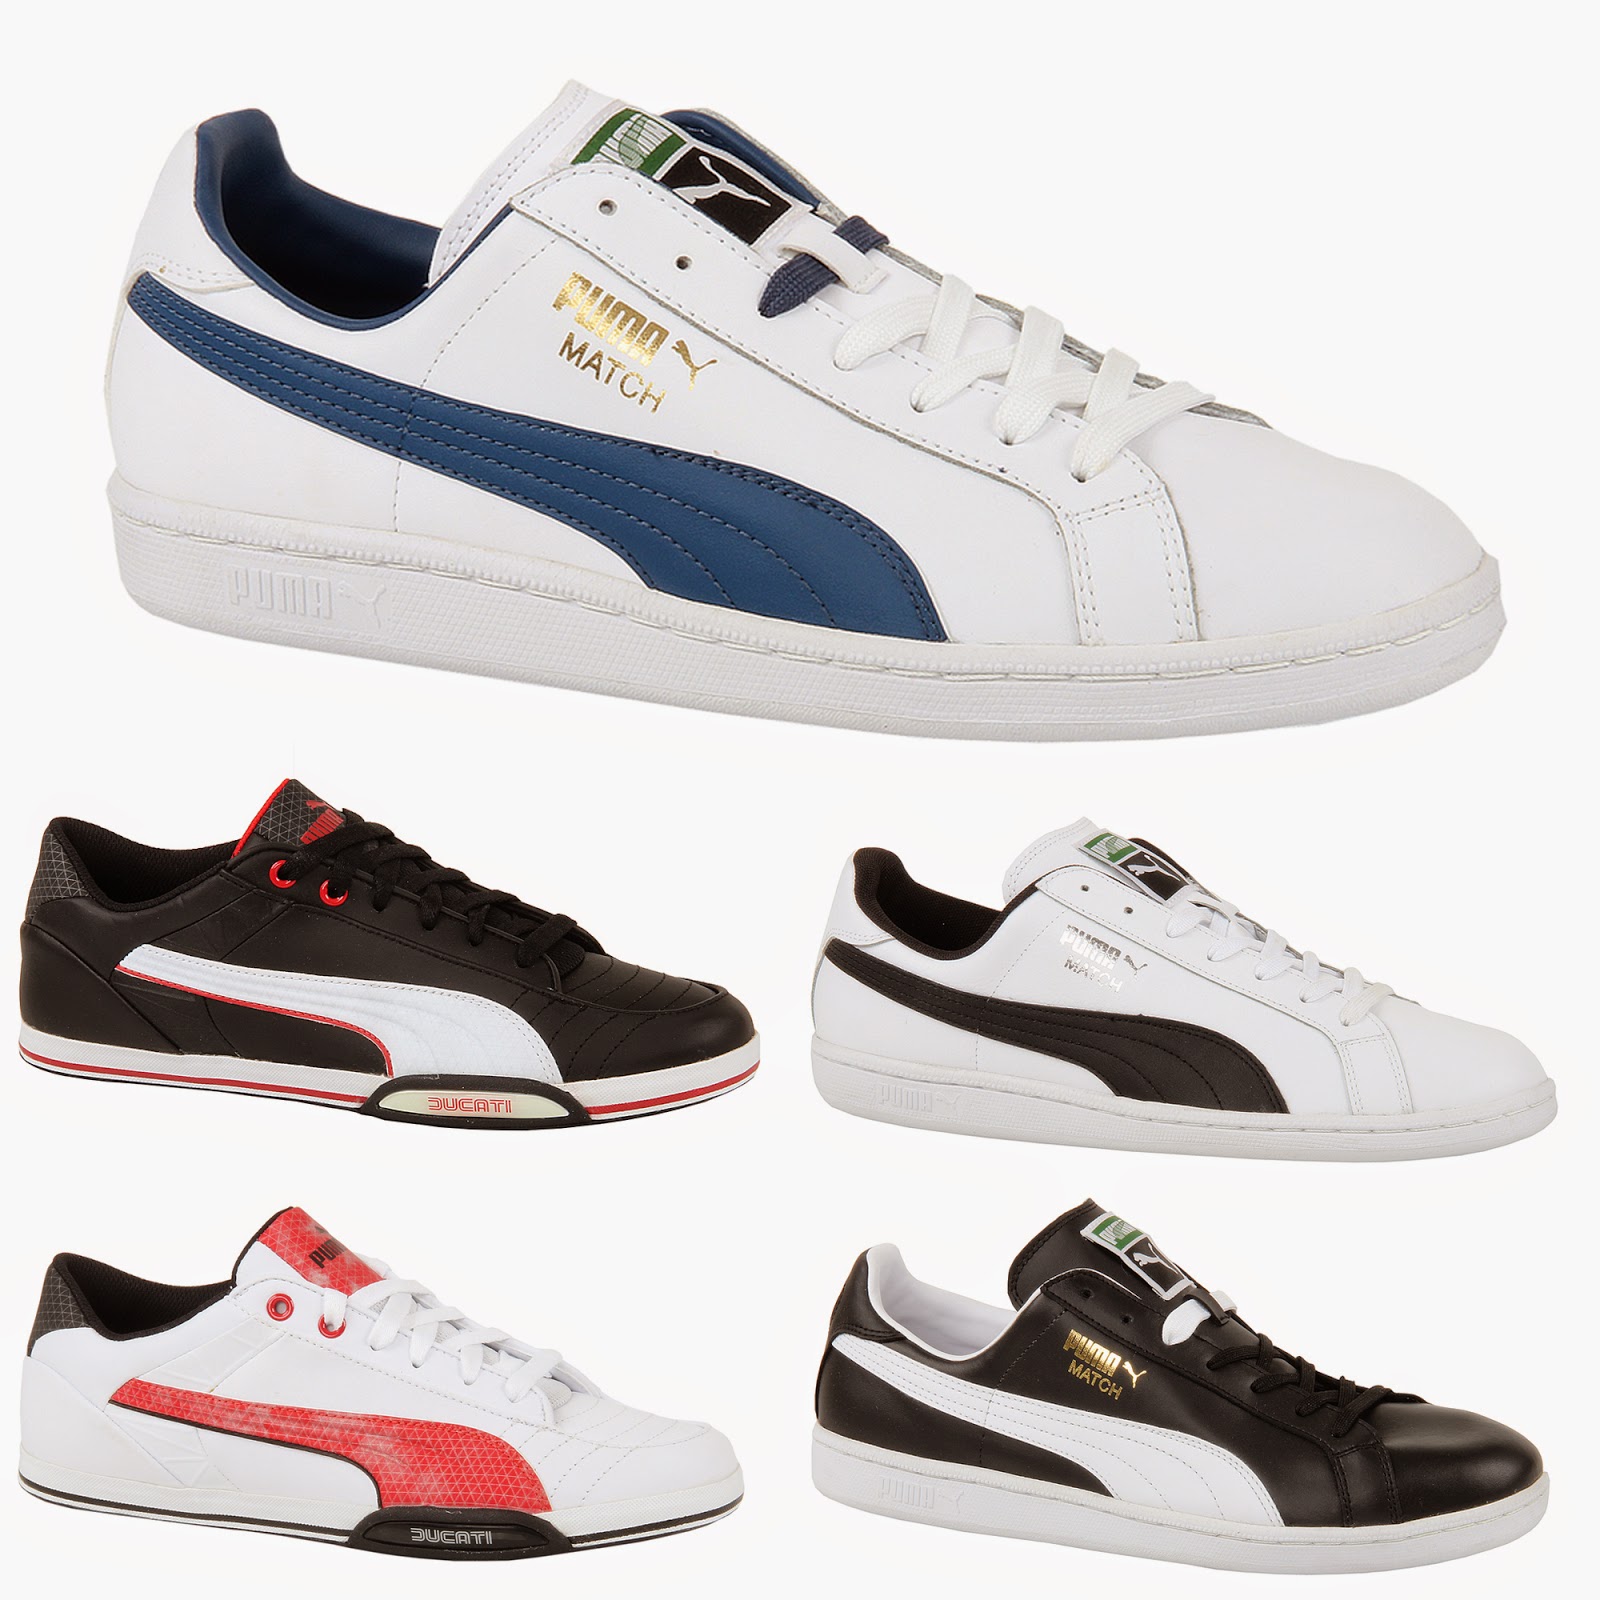 New Puma Ducati Xelerate Lo Shoes Gray Red Black Trainers Mens ...